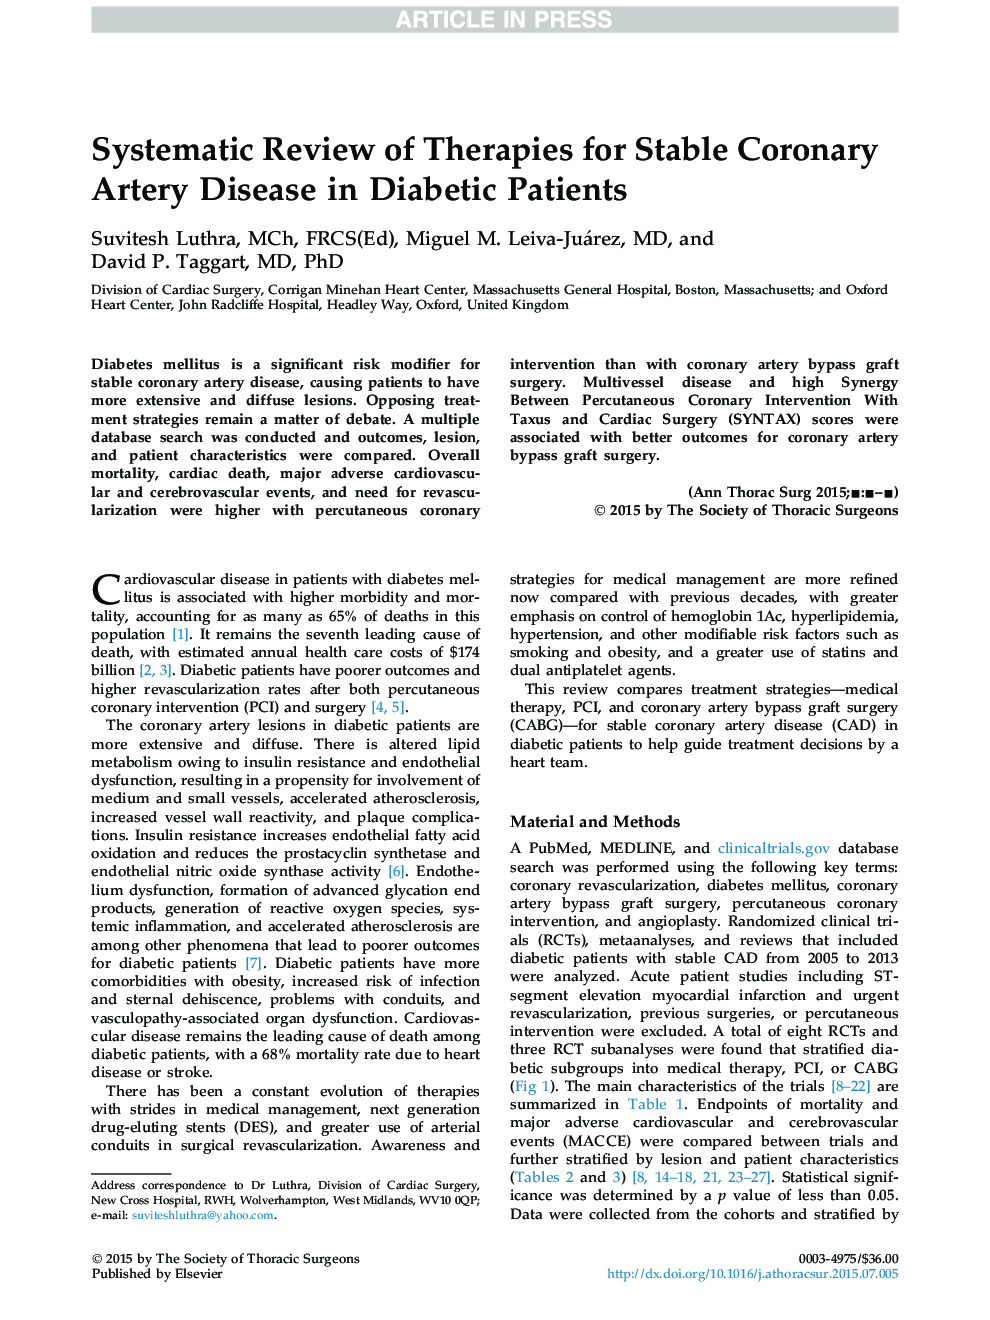 Systematic Review of Therapies for Stable Coronary Artery Disease in Diabetic Patients